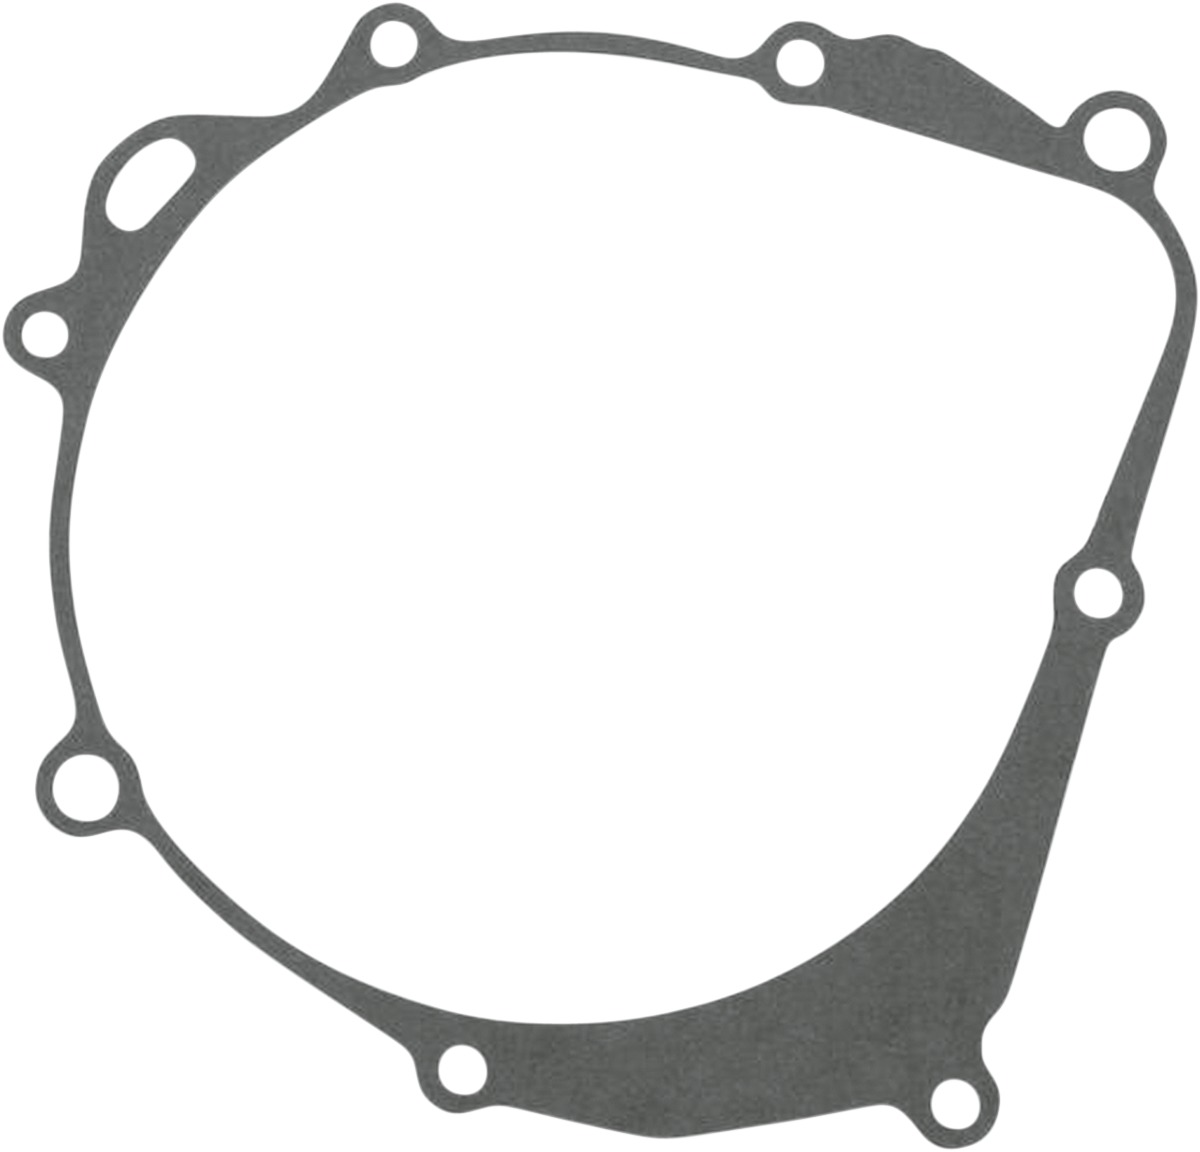 Ignition Cover Gasket - Replaces 11483-29F00 For DRZ400 & 11061-S085 On KLX400 - Click Image to Close